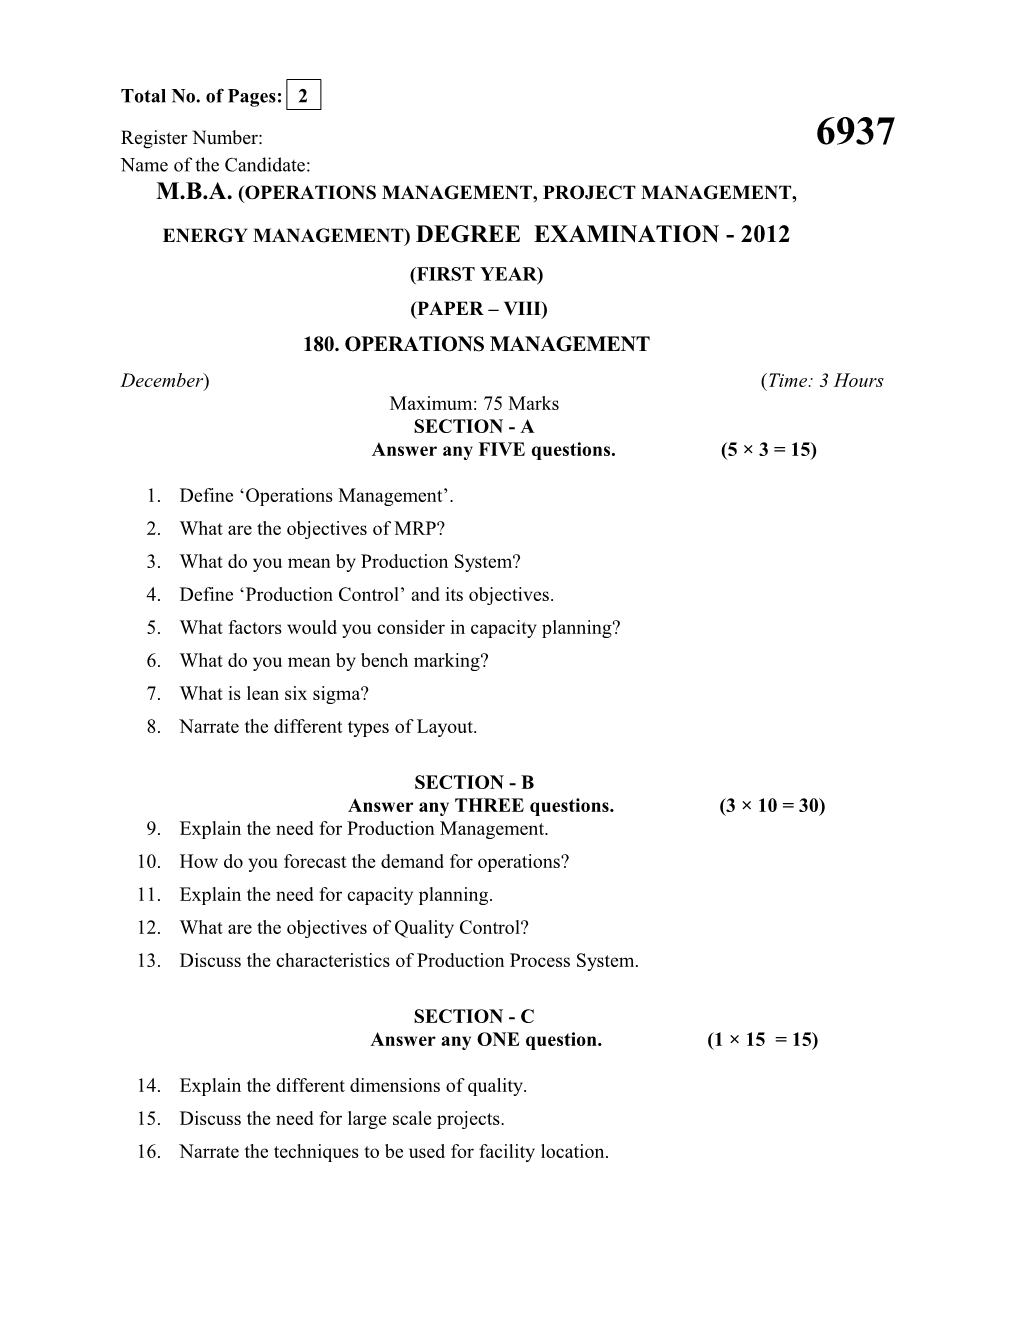 M.B.A. (Operations MANAGEMENT, Project Management, Energy Management) DEGREE EXAMINATION